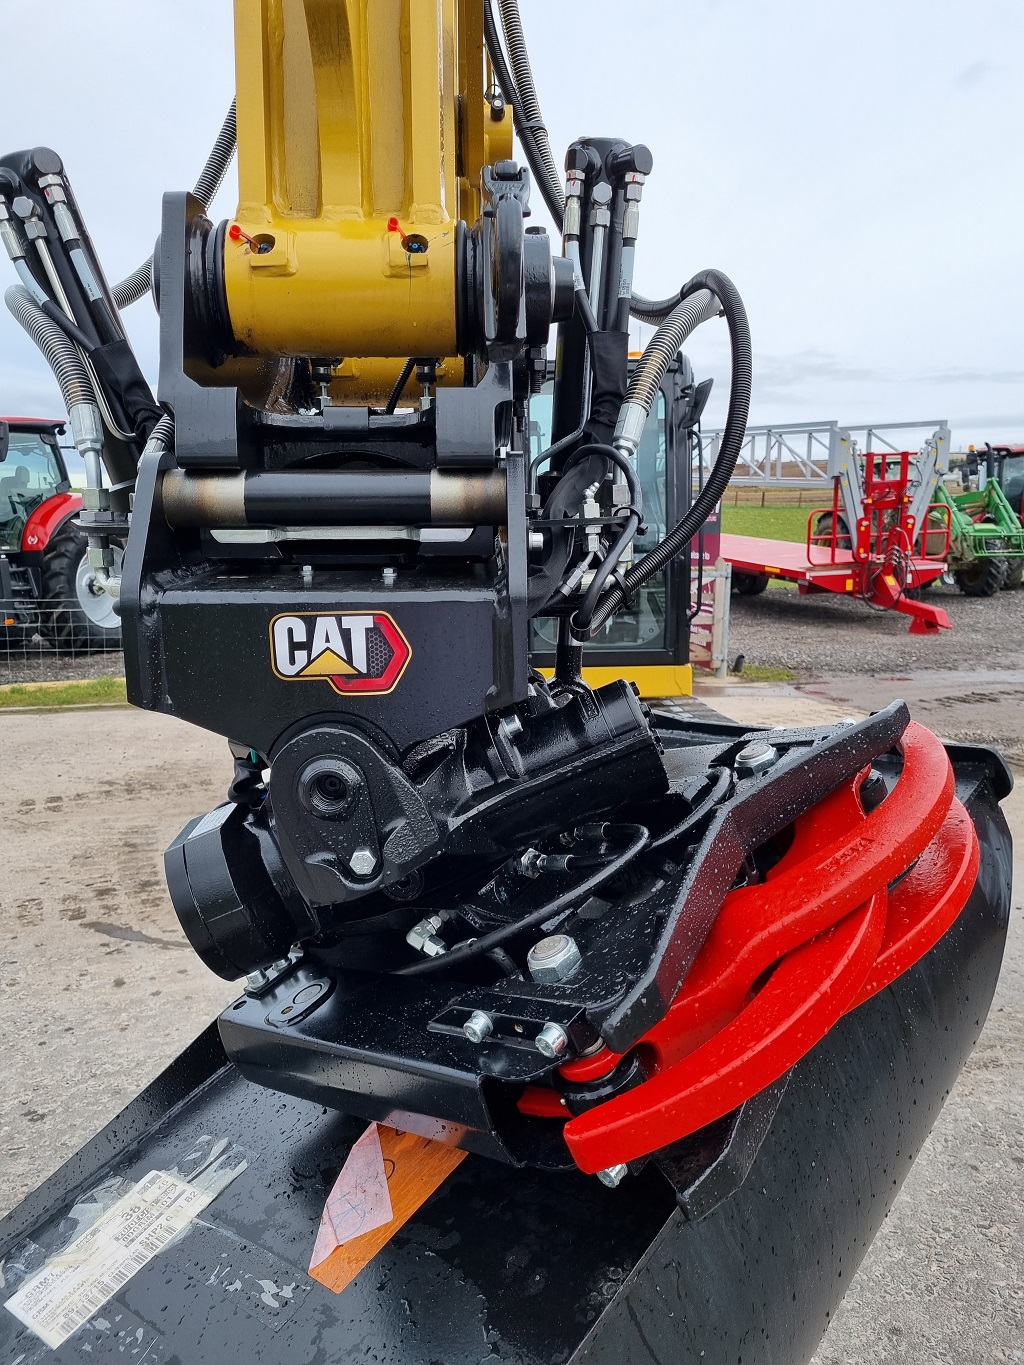 First Cat tilt rotator S8 now available in UK